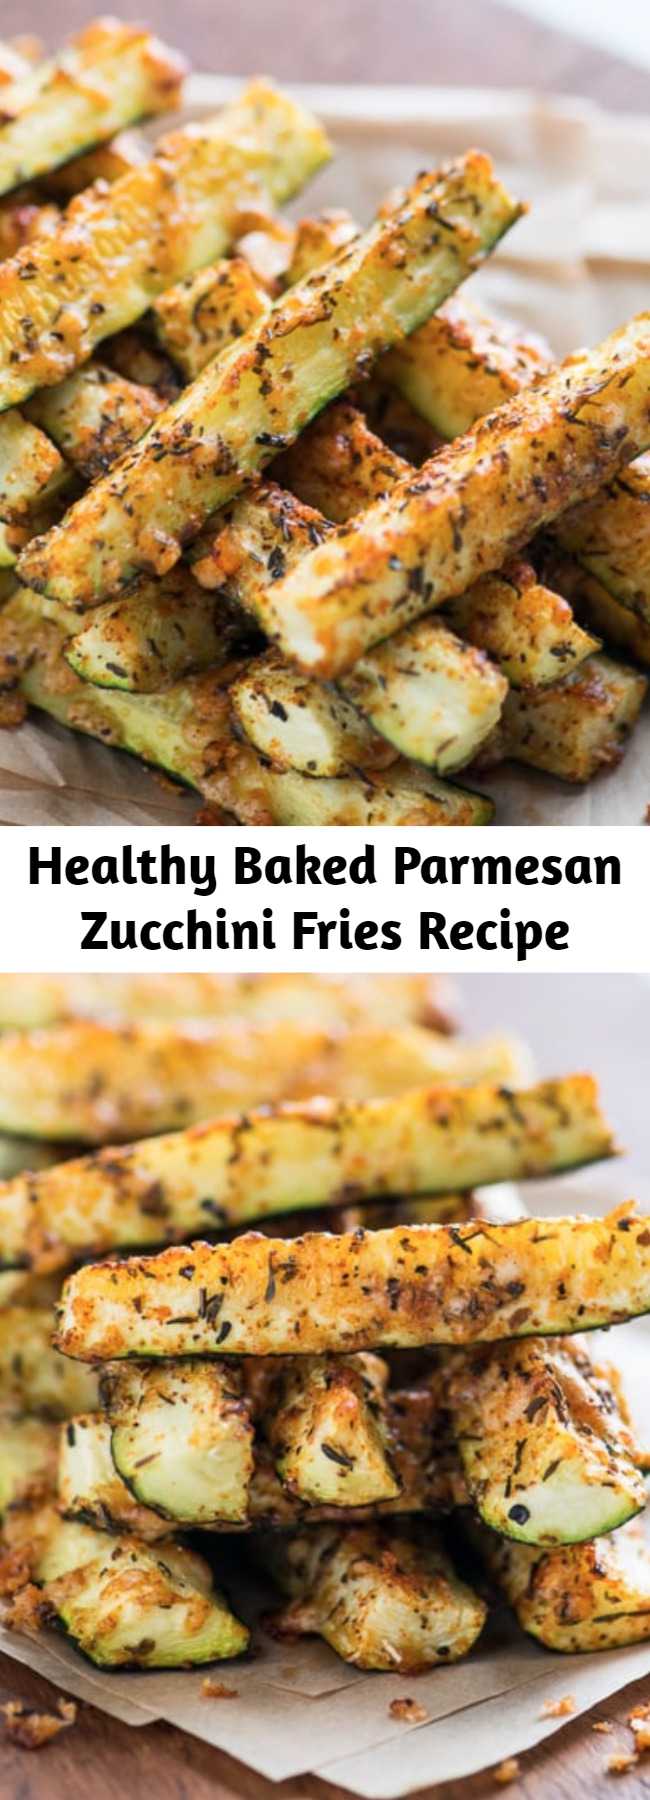 Healthy Baked Parmesan Zucchini Fries Recipe - These are so good, not "crispy" because they're healthy but still tasty. There's no bread crumbs so they're a little healthier than most zucchini fries recipes and less crispy. If you want them crispy and not keto, add bread crumbs to the coating, then spray the outside before baking.